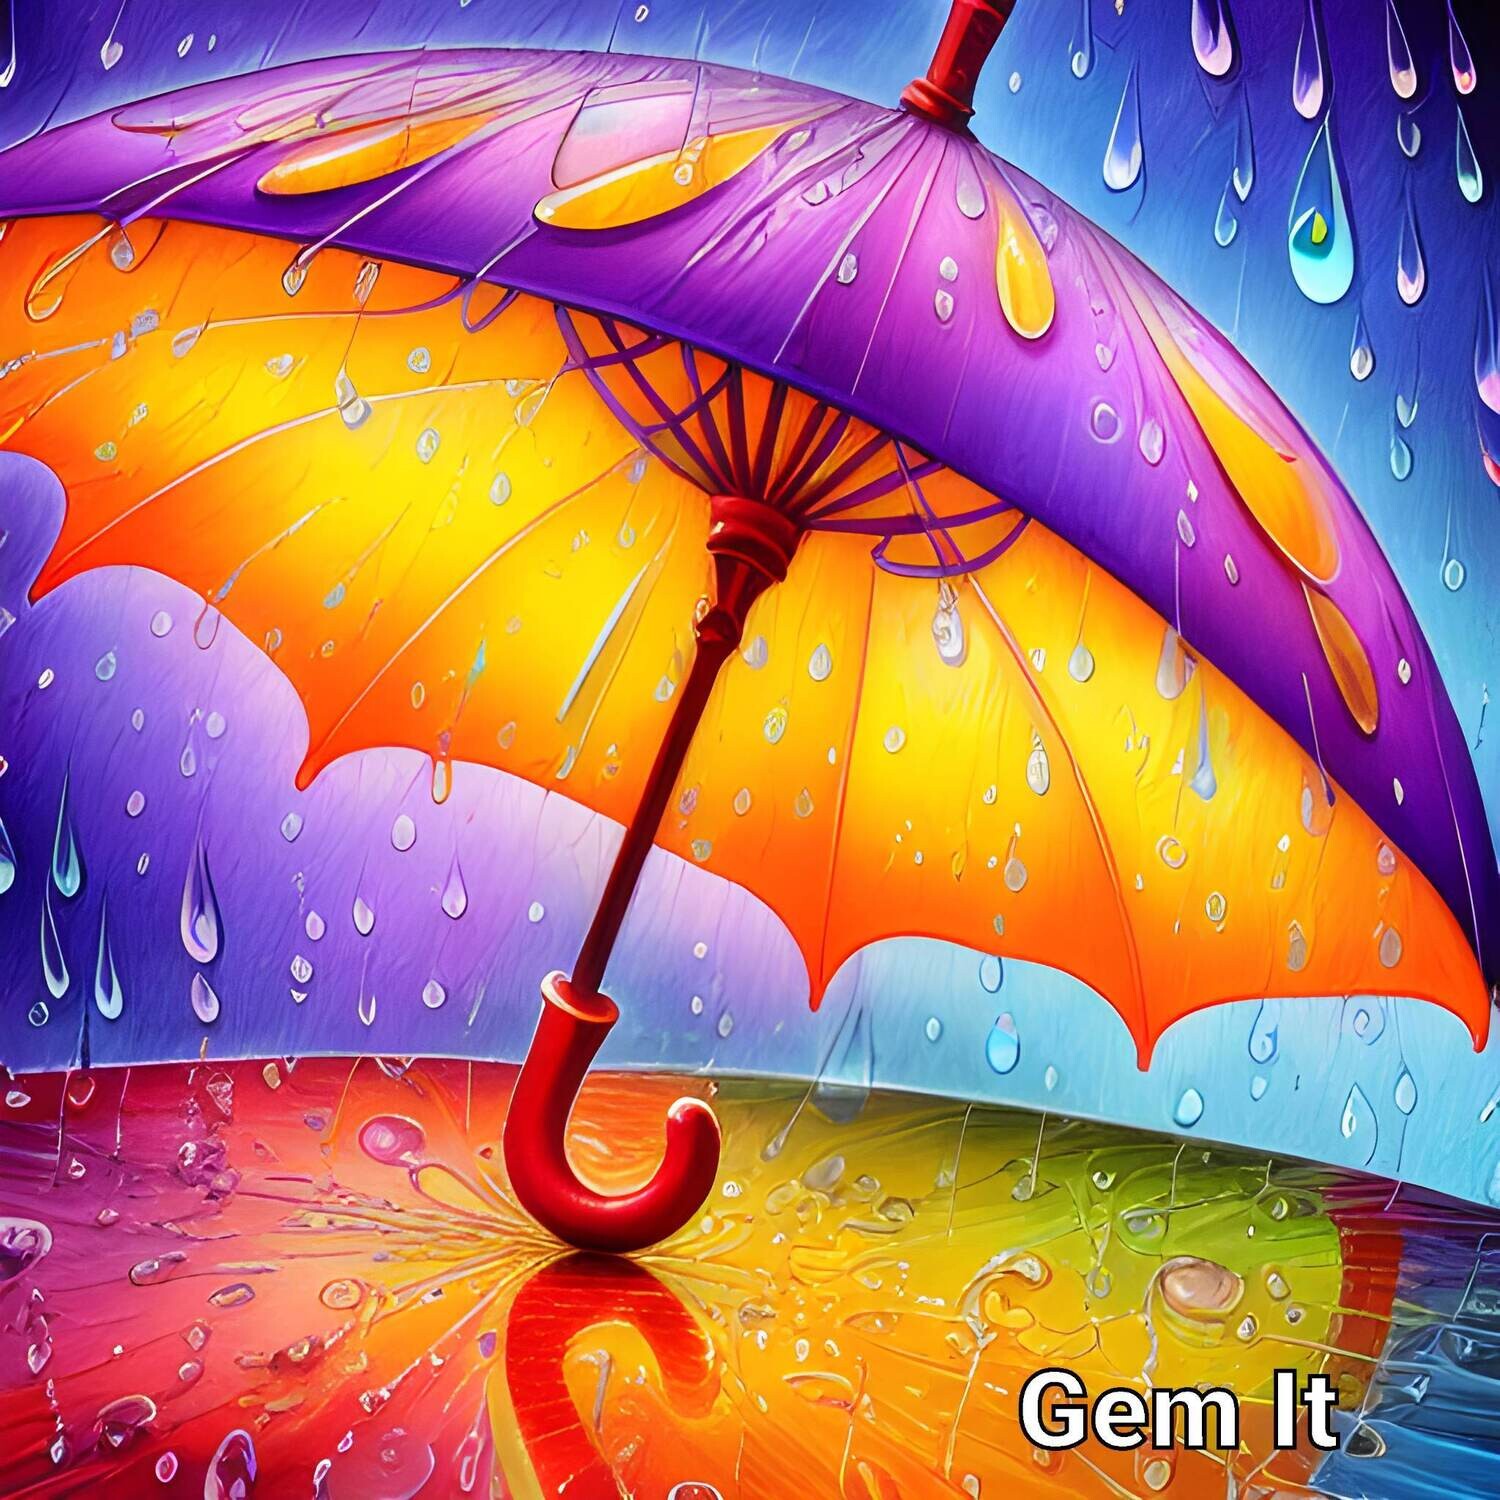 Colourful Umbrella 2 - Full Drill Diamond Painting - Specially ordered for you. Delivery is approximately 4 - 6 weeks.